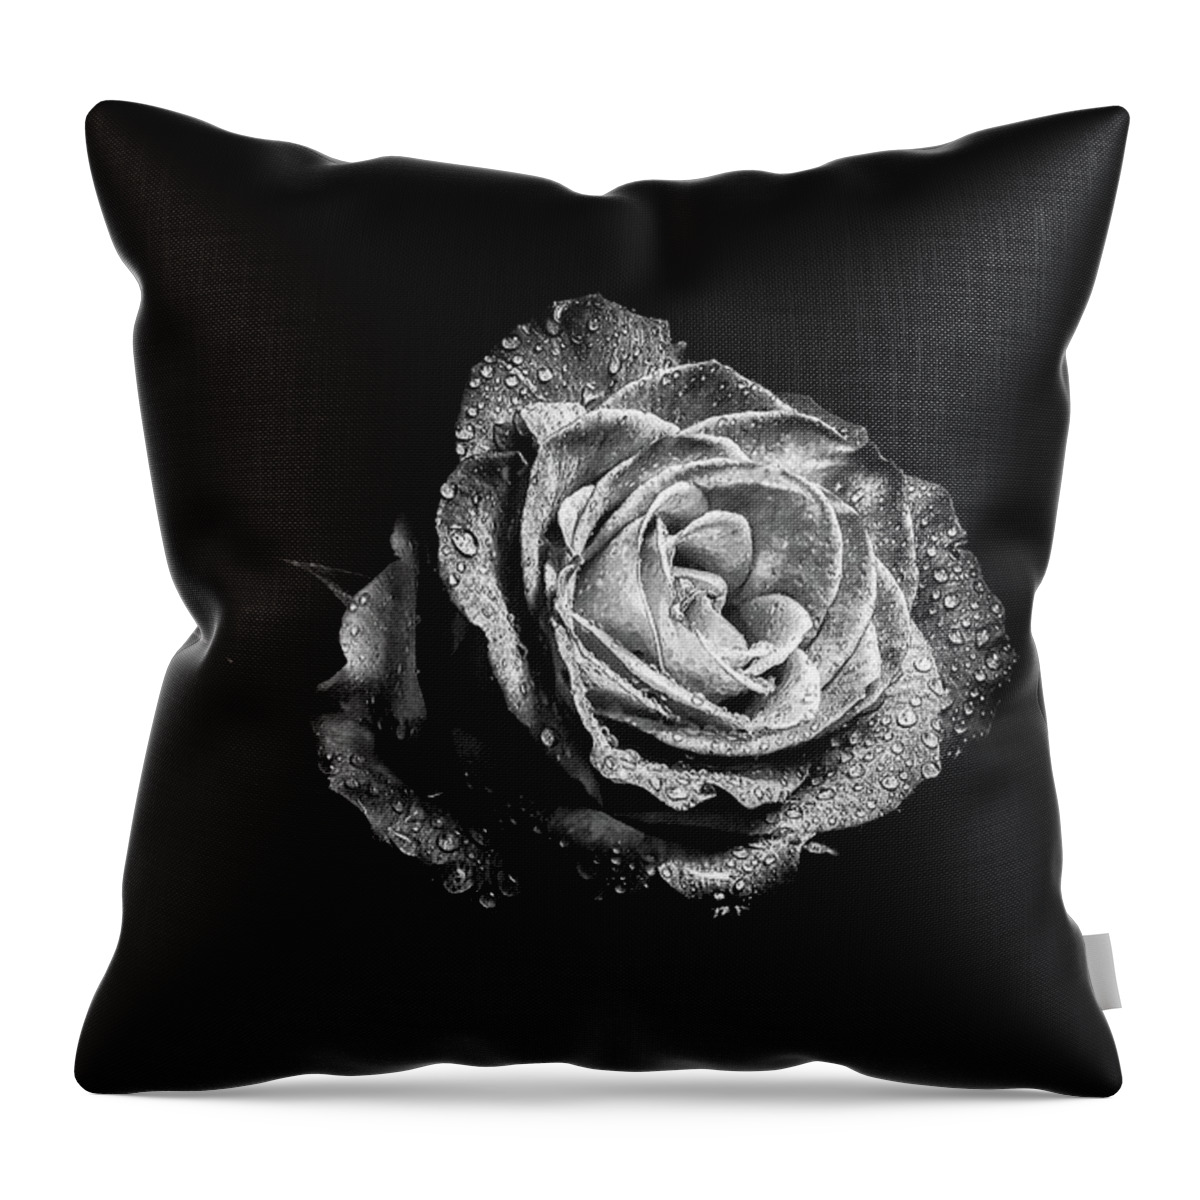 Published Throw Pillow featuring the photograph To Cease Living by Enrique Pelaez